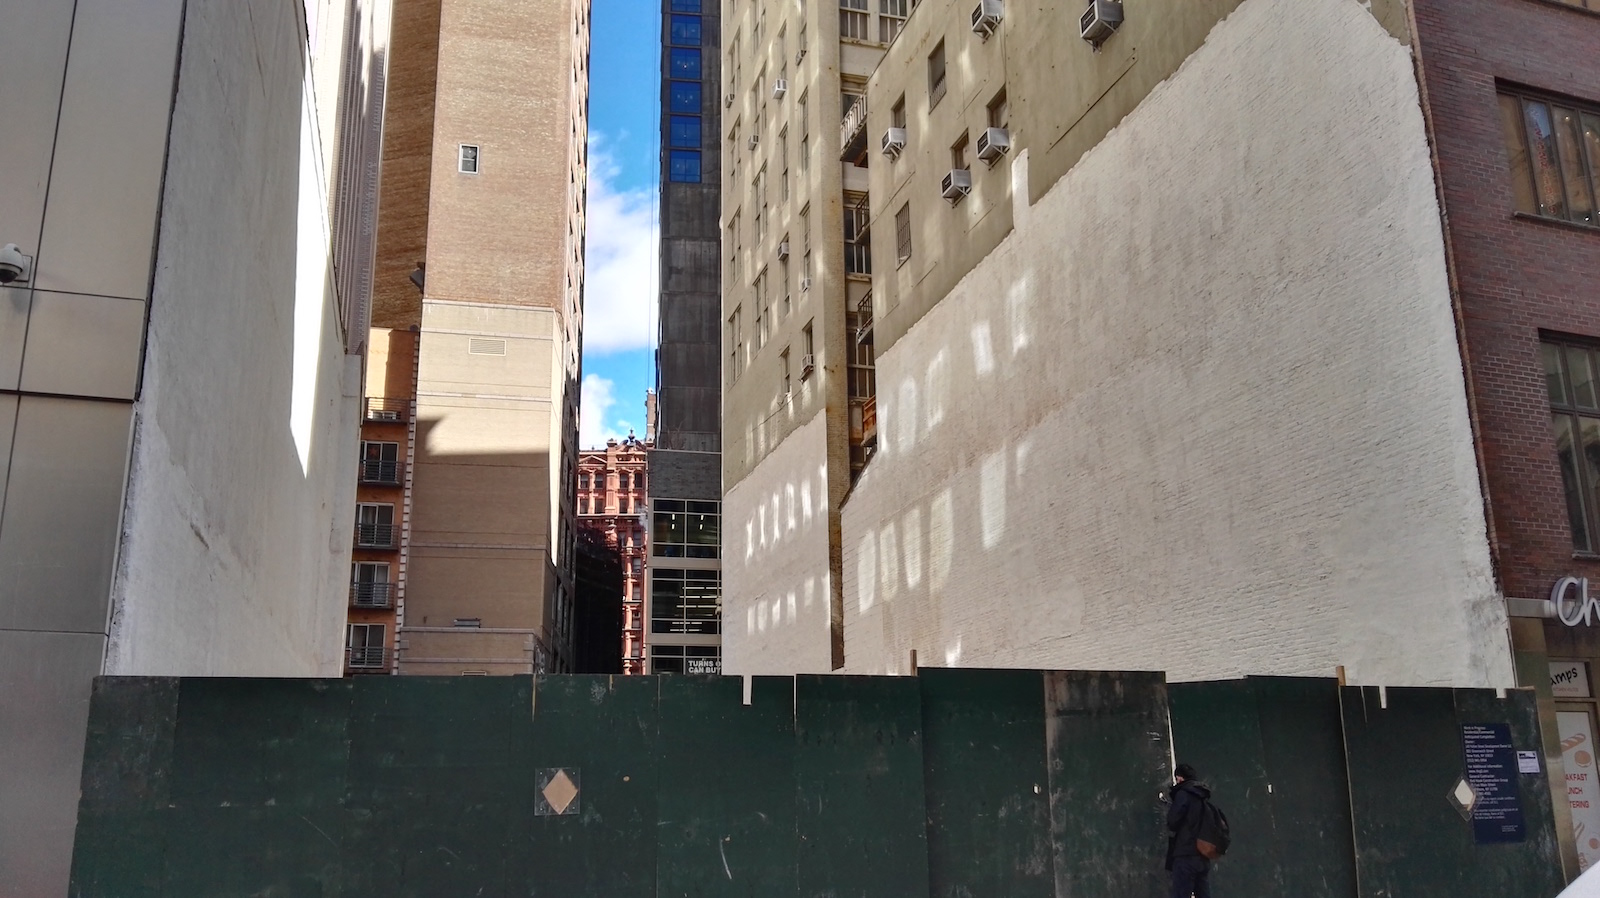 143 Fulton Street construction site, Fulton Street side. Photo courtesy YIMBY reader Rich Brome.